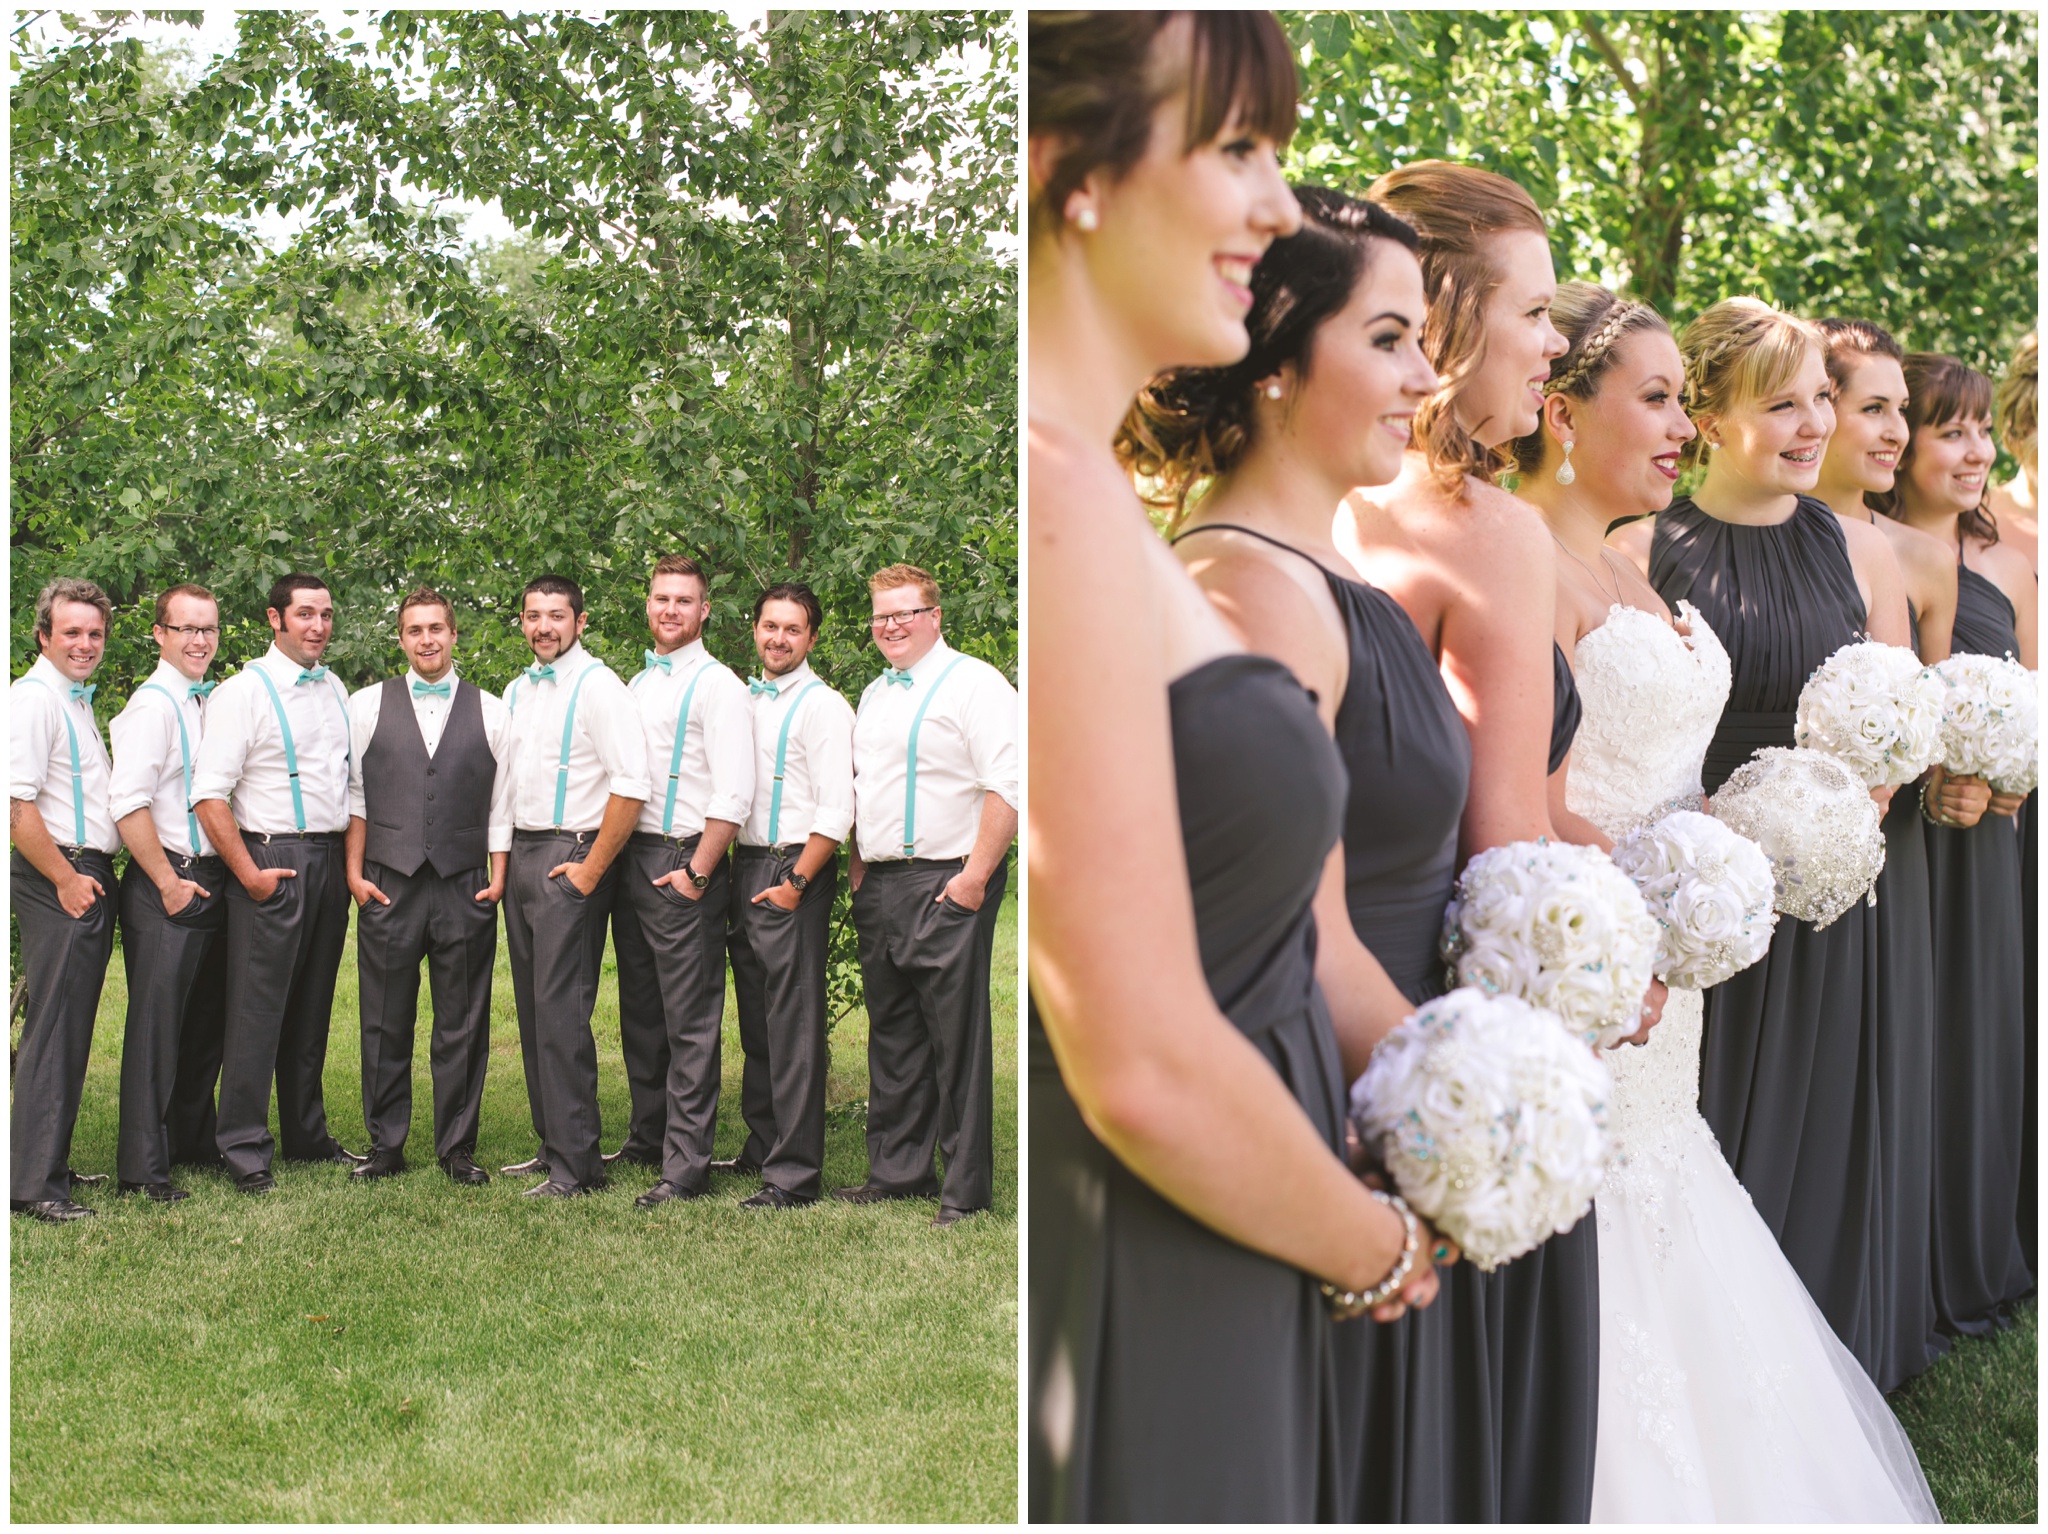 Ideas to pose a large wedding party photo